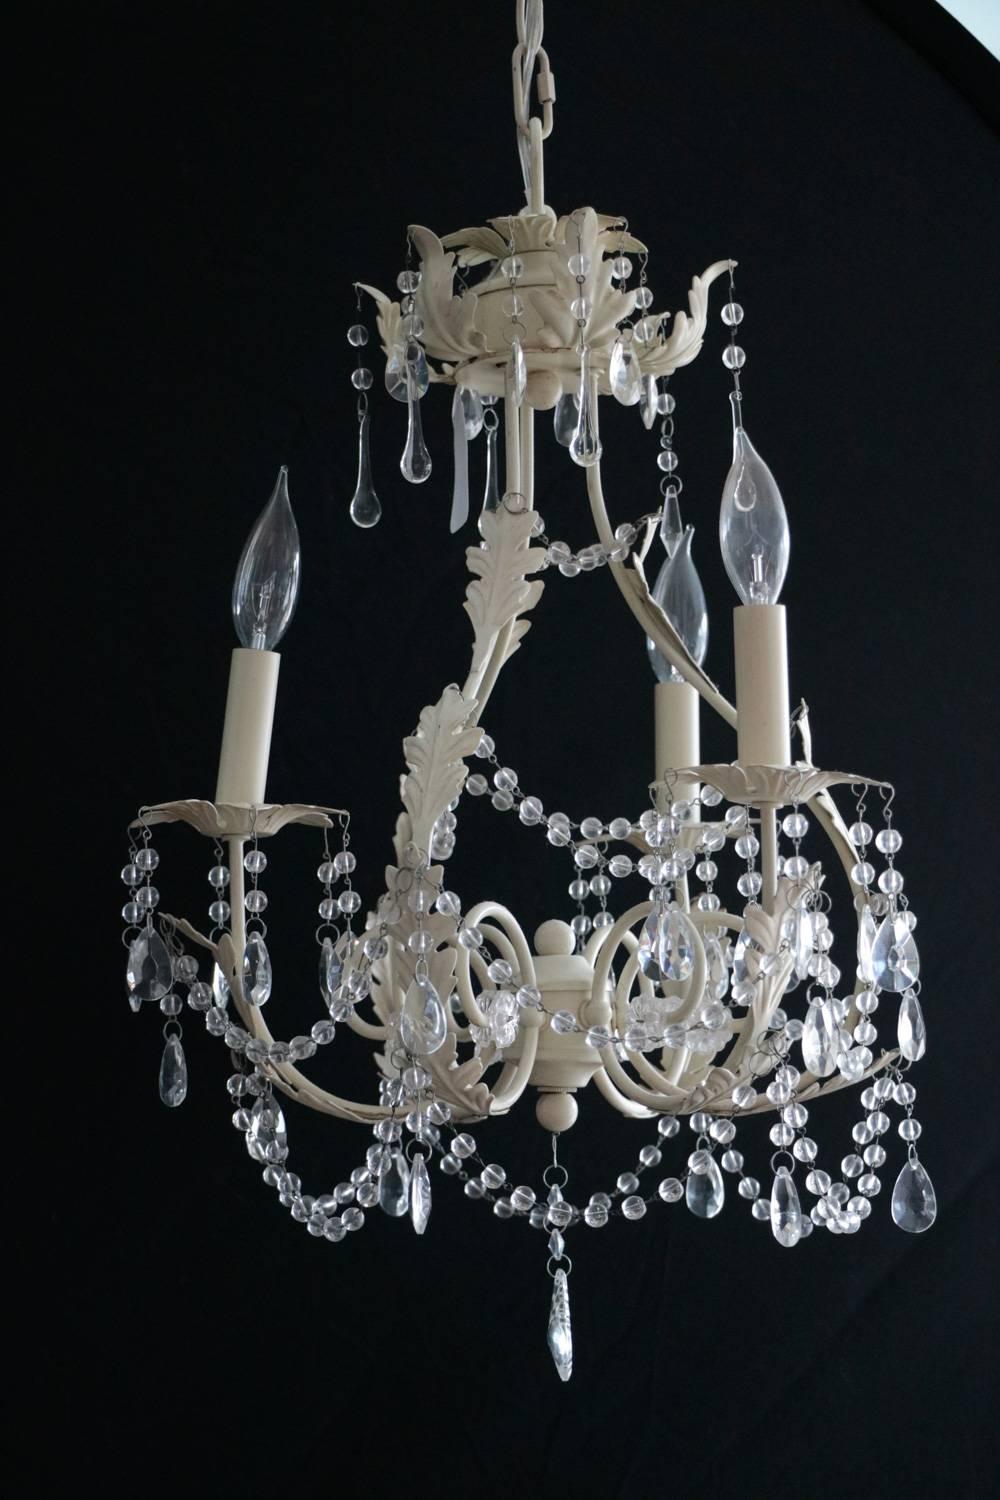 French Flare Distressed White Toile Chandelier.  Tear Drop Crystals with Crystal Beads.  Simple Elegance.  